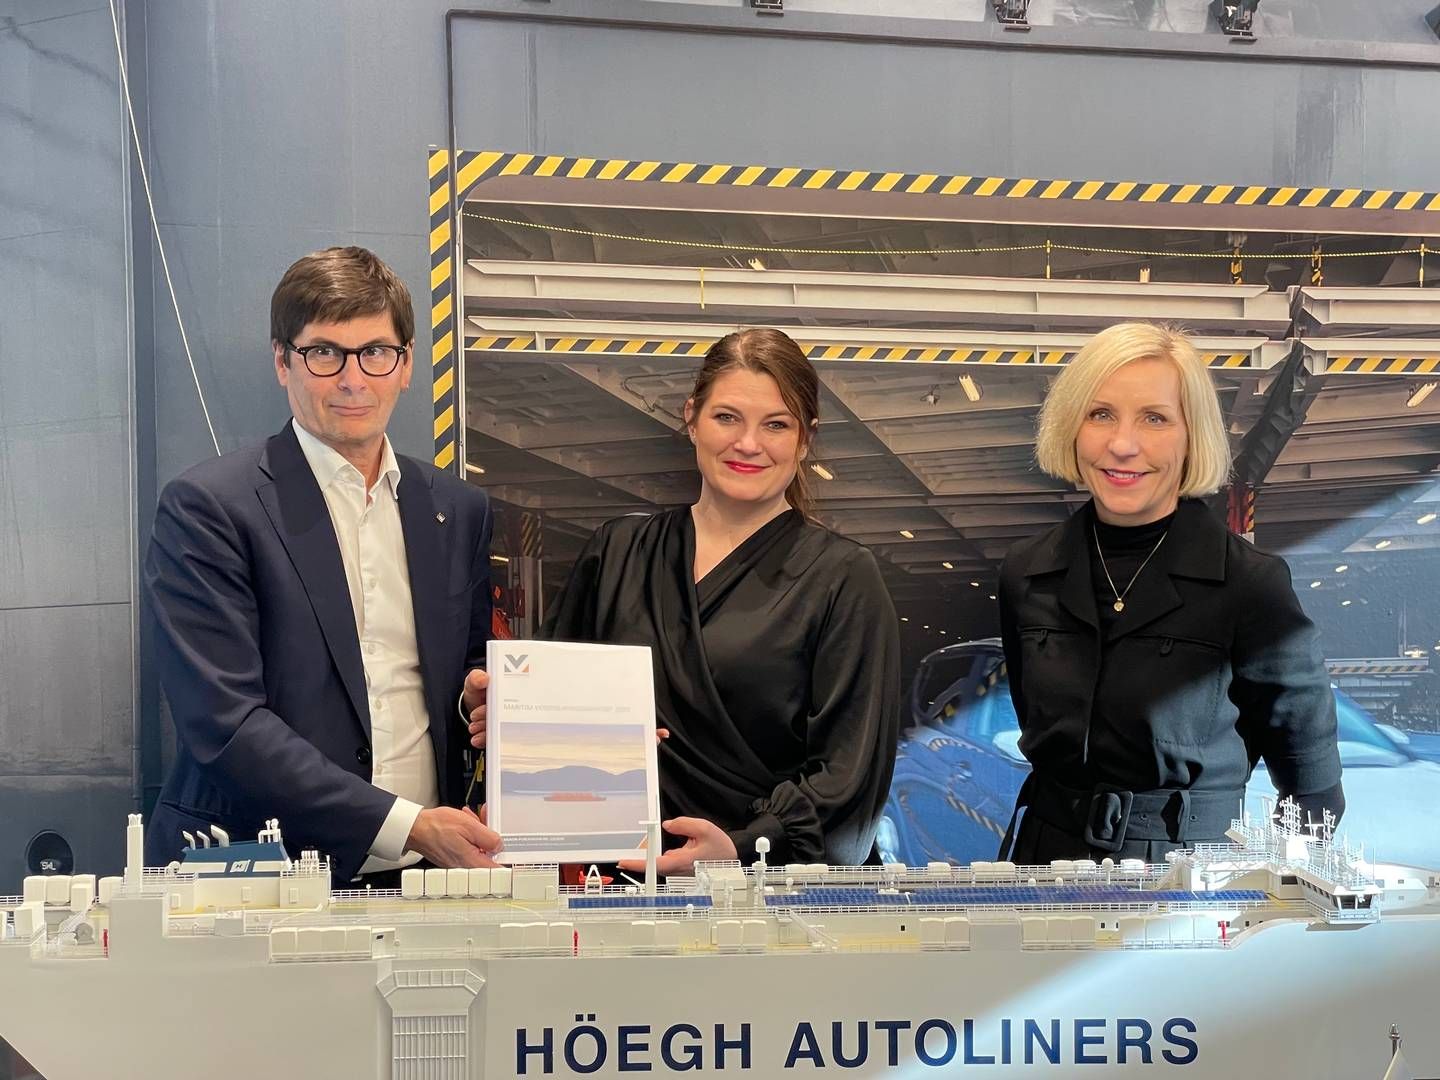 From left: Even Aas, chairman of the board of the Maritime Forum, Cecilie Myrseth, minister for fisheries and oceans, and Lise Duetoft, head of strategy and analysis at Höegh Autoliners. | Photo: Idha Toft Valeur